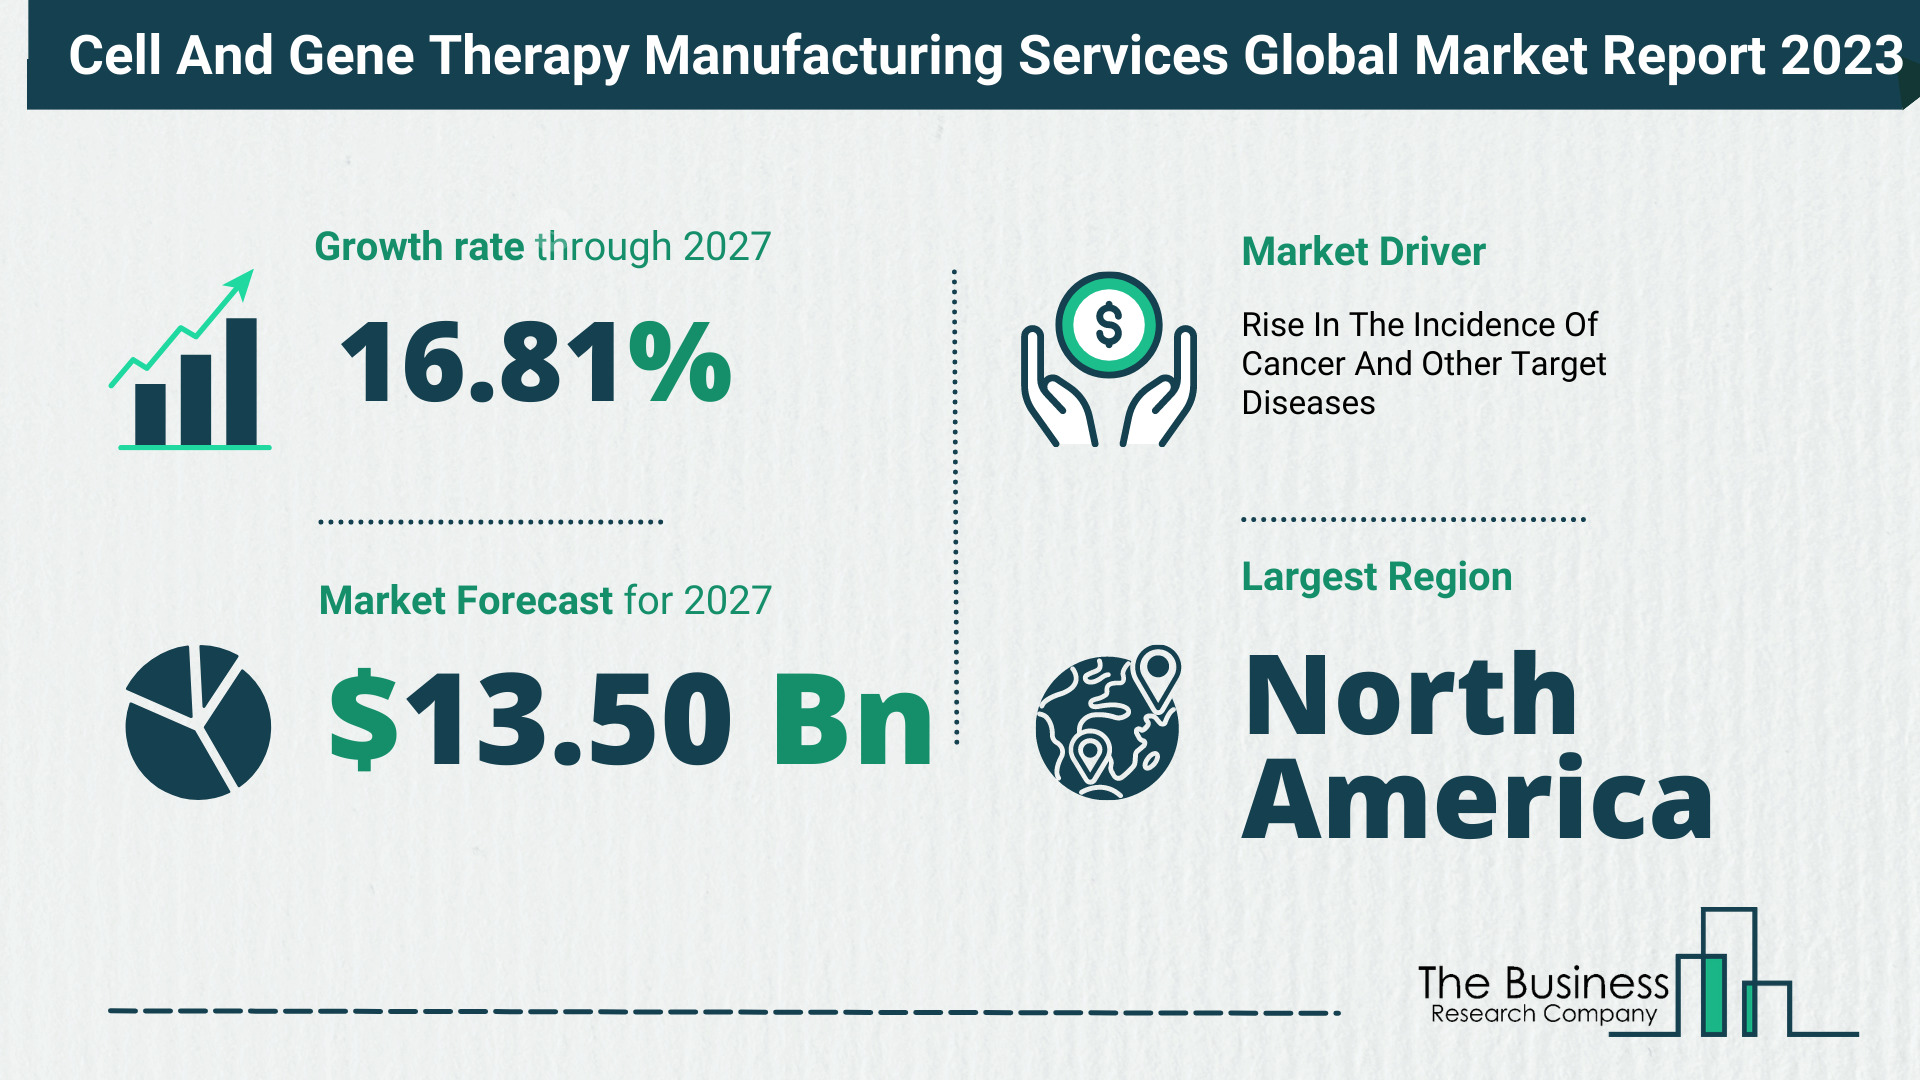 How Will The Cell And Gene Therapy Manufacturing Services Market Globally Expand In 2023?